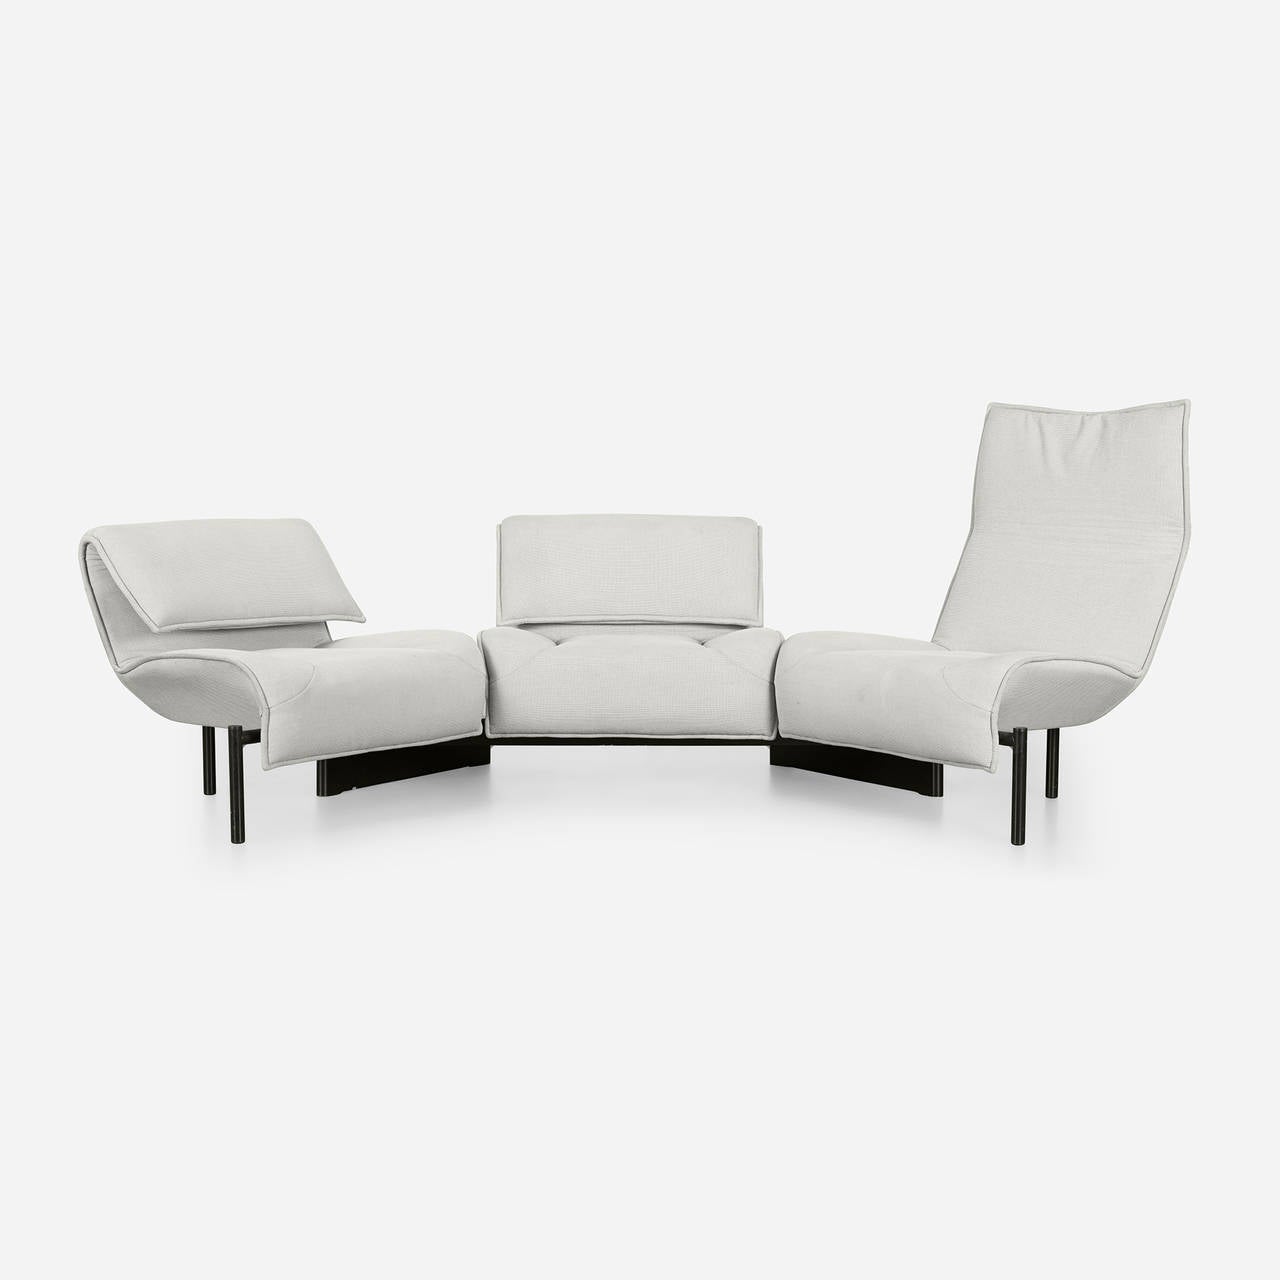 Sofa features three sections that can be rotated to create separate seats.